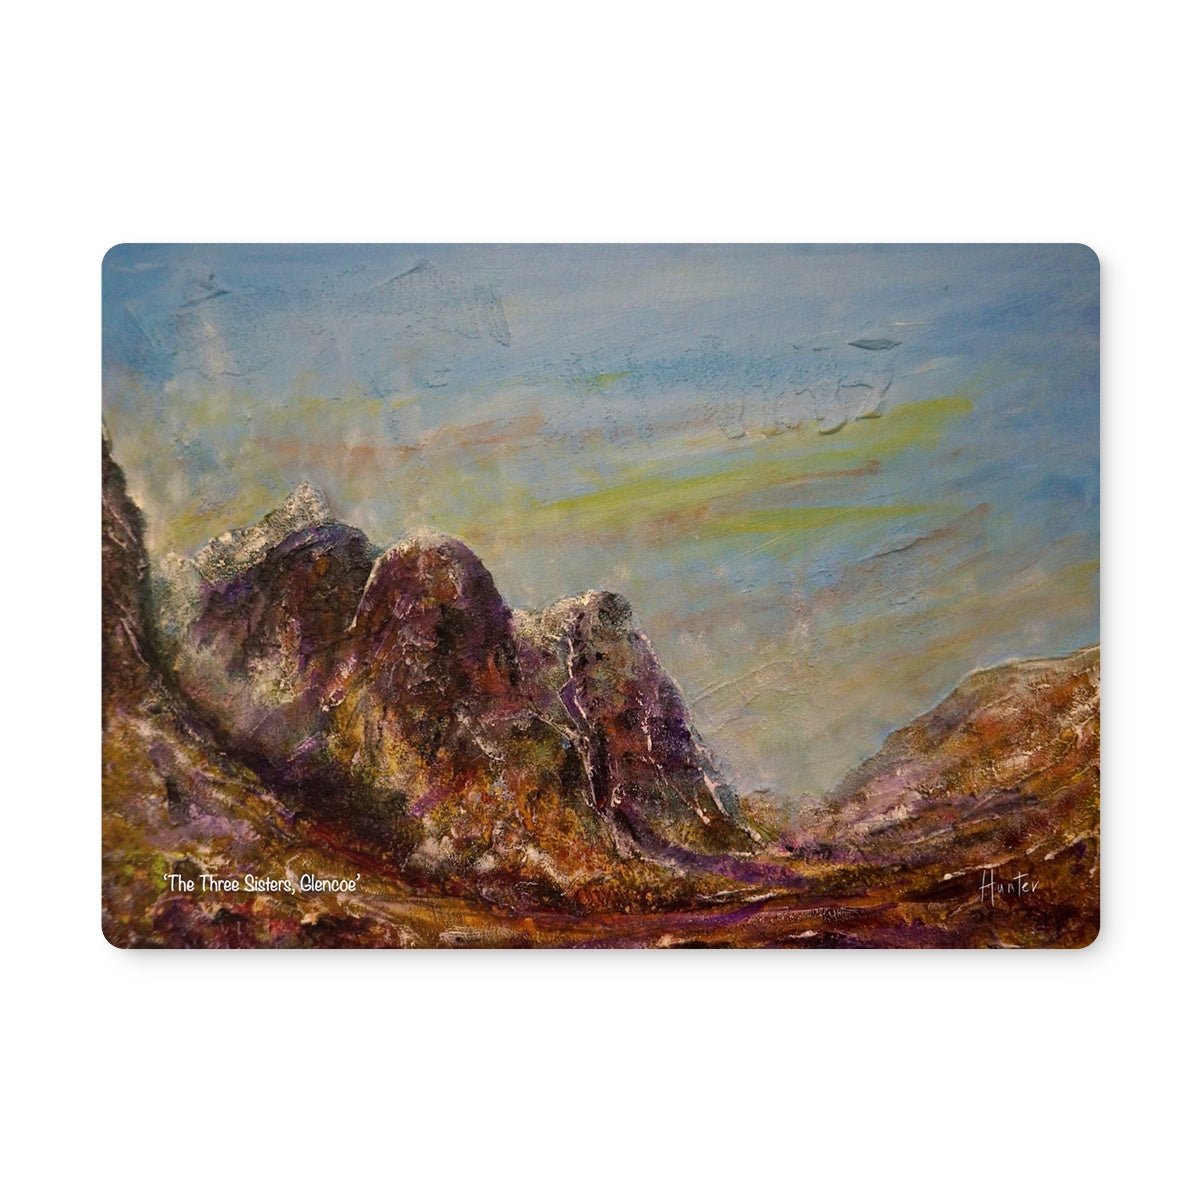 Three Sisters Glencoe Art Gifts Placemat-Placemats-Glencoe Art Gallery-4 Placemats-Paintings, Prints, Homeware, Art Gifts From Scotland By Scottish Artist Kevin Hunter